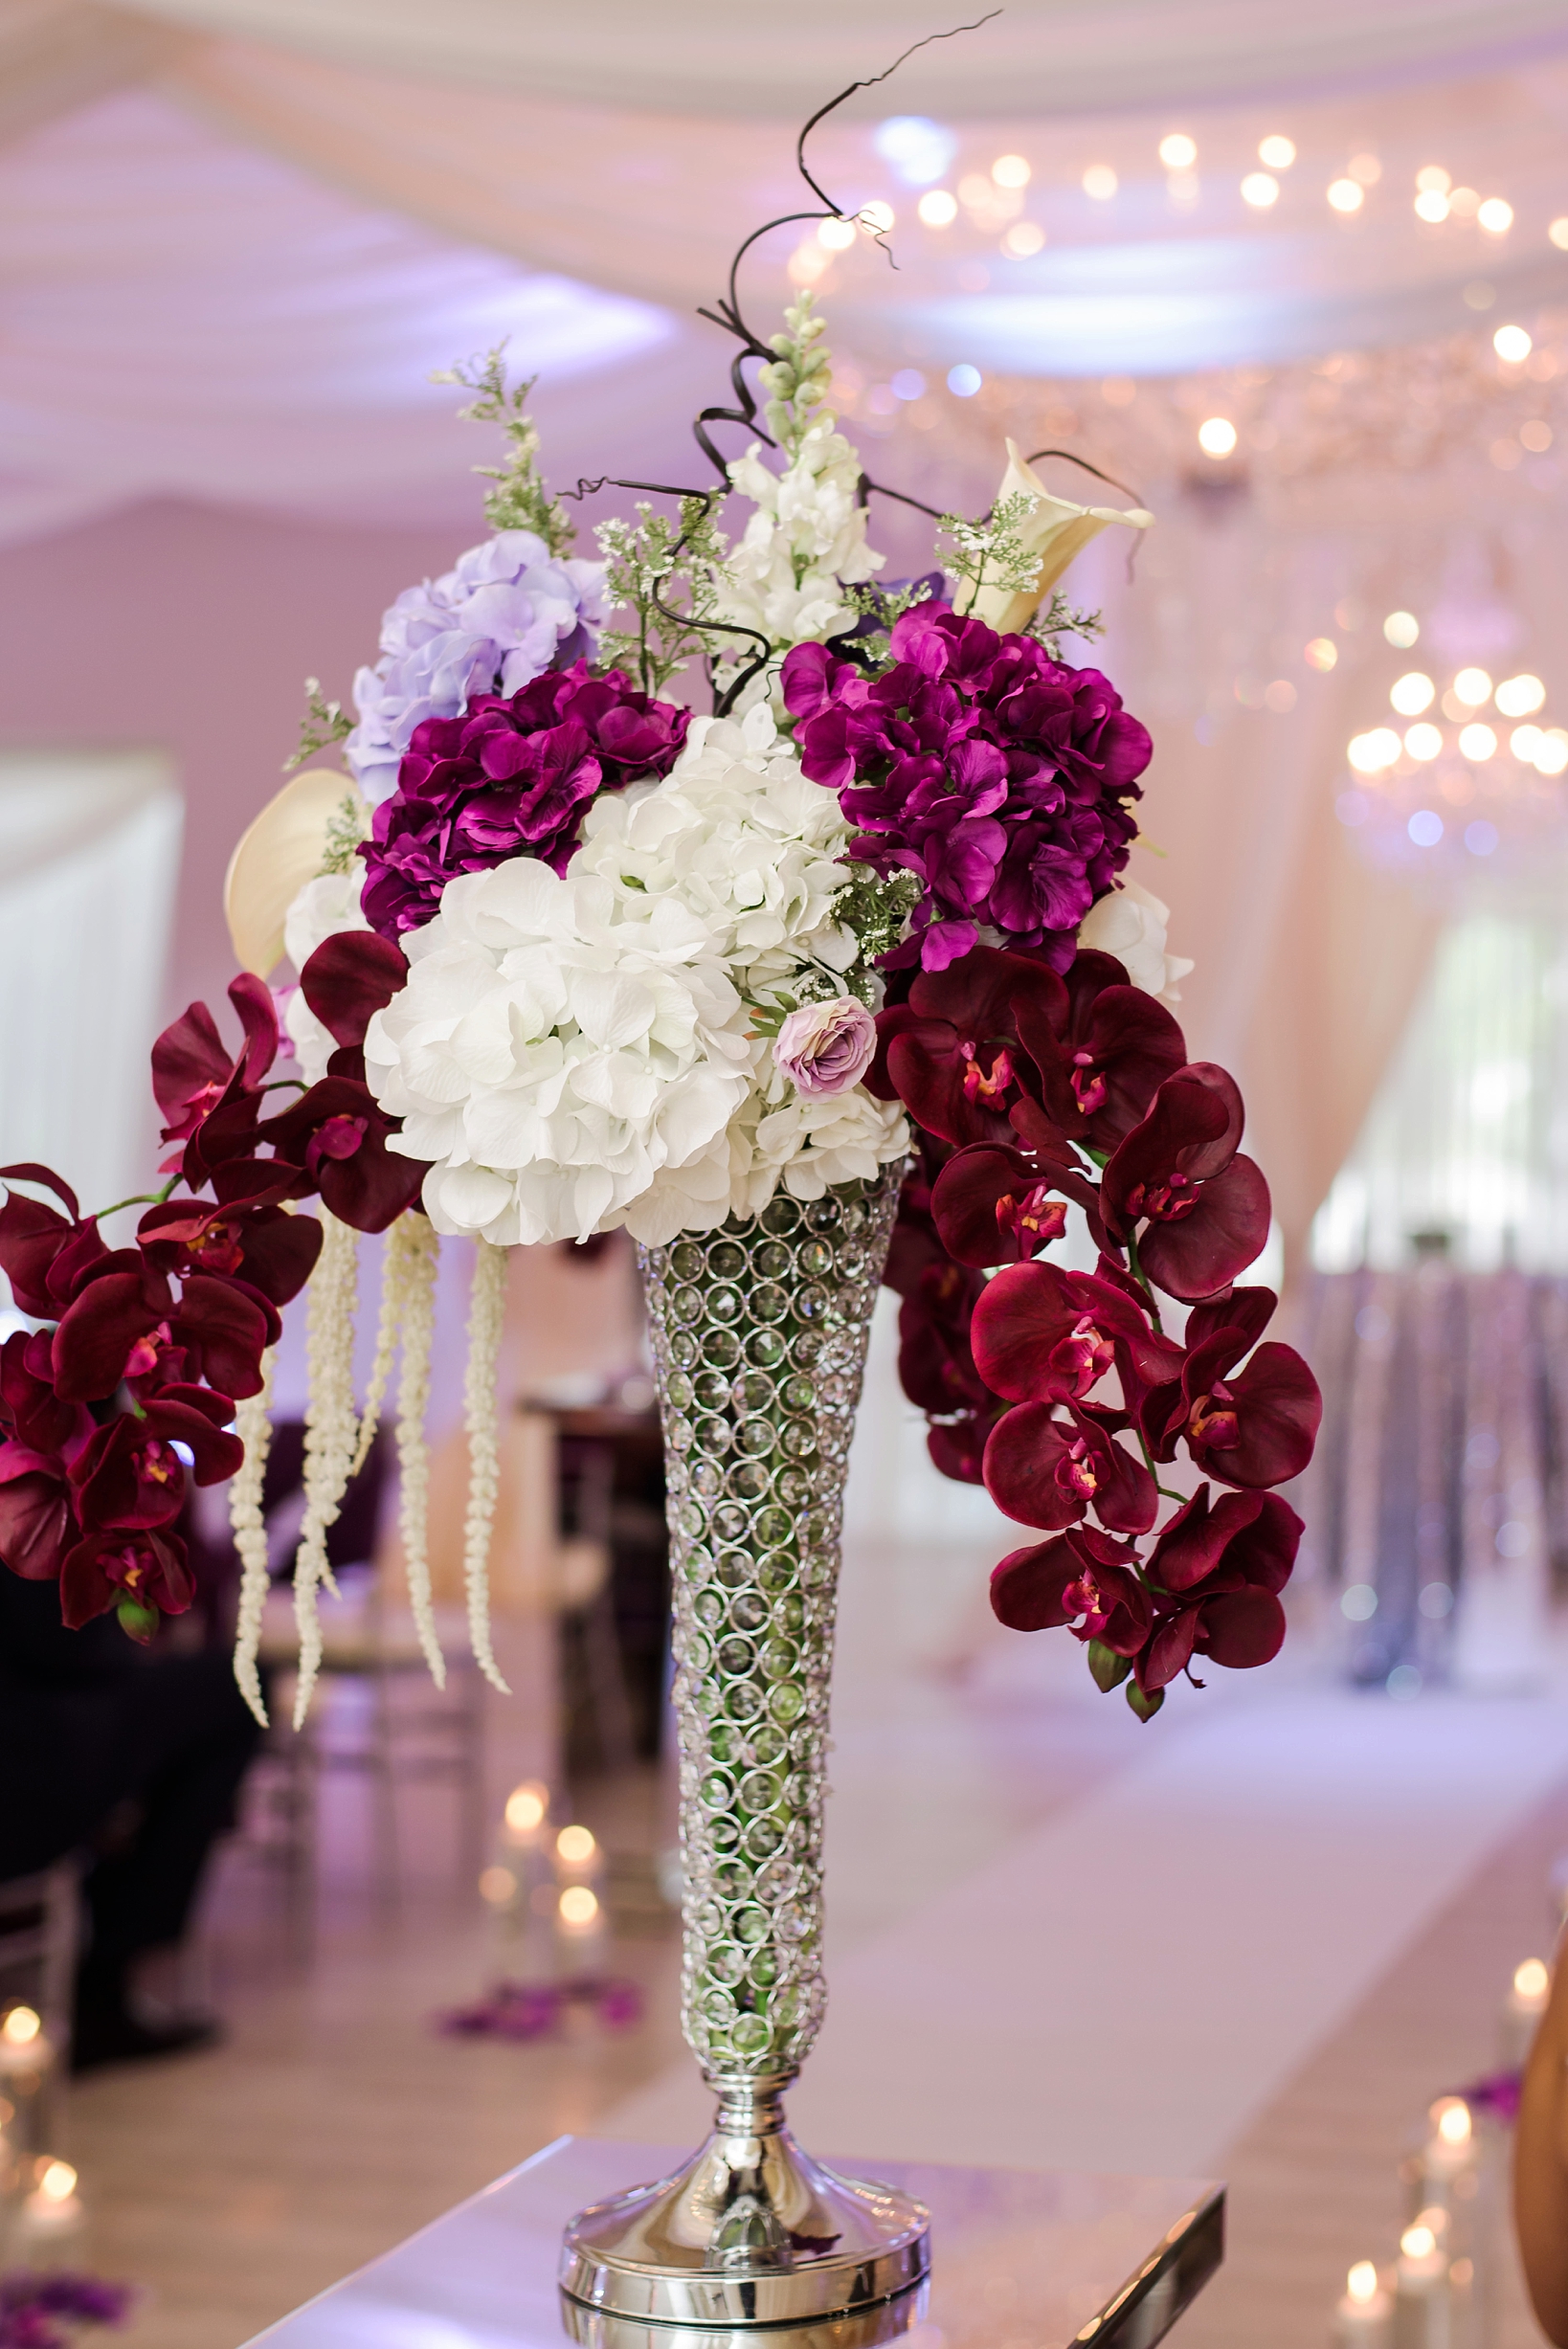 Orchid and hydrangeas filled the room with pops of color